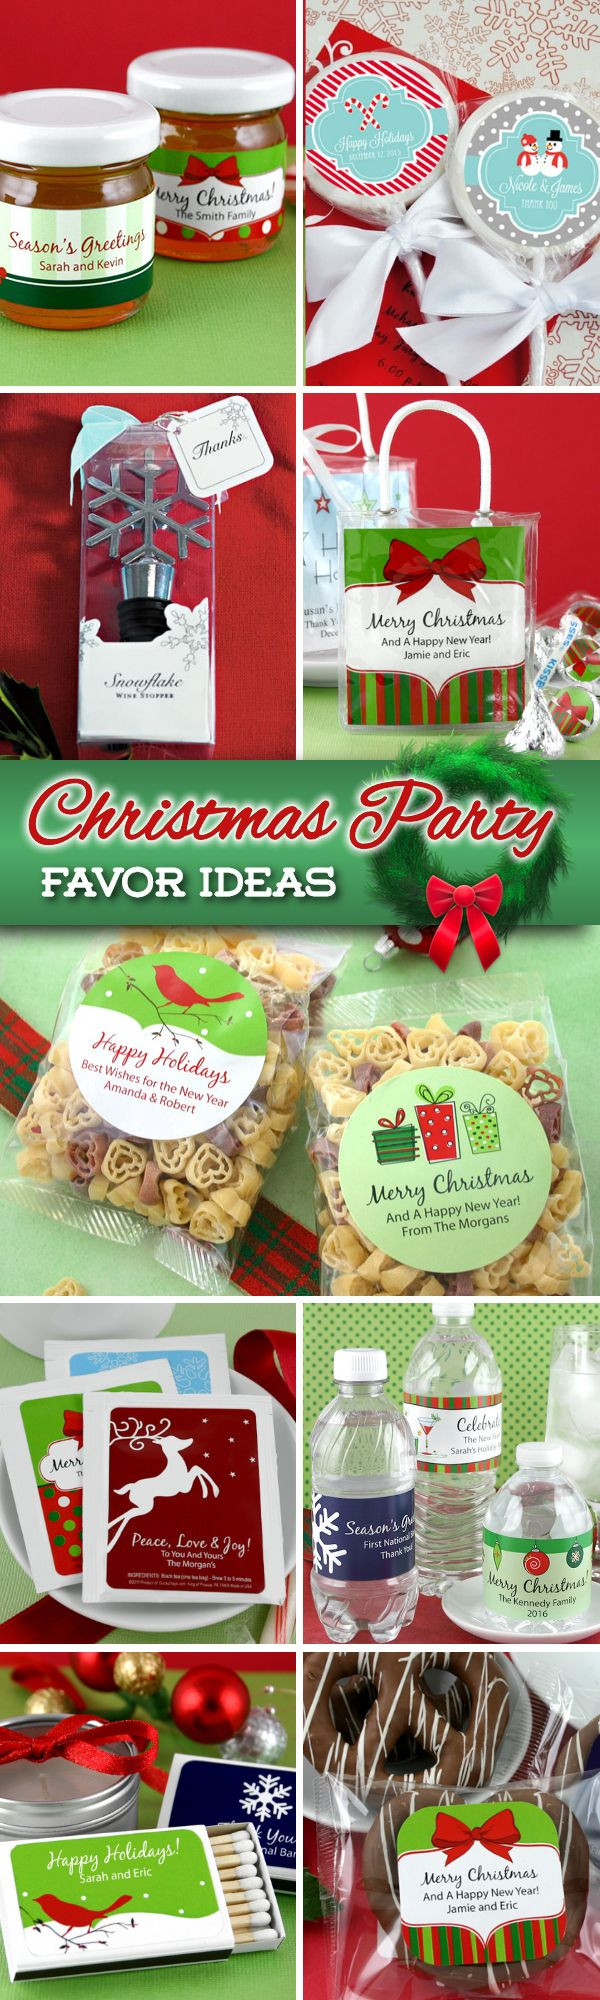 Neighborhood Christmas Party Ideas
 Throwing a big Christmas party this year Maybe you are